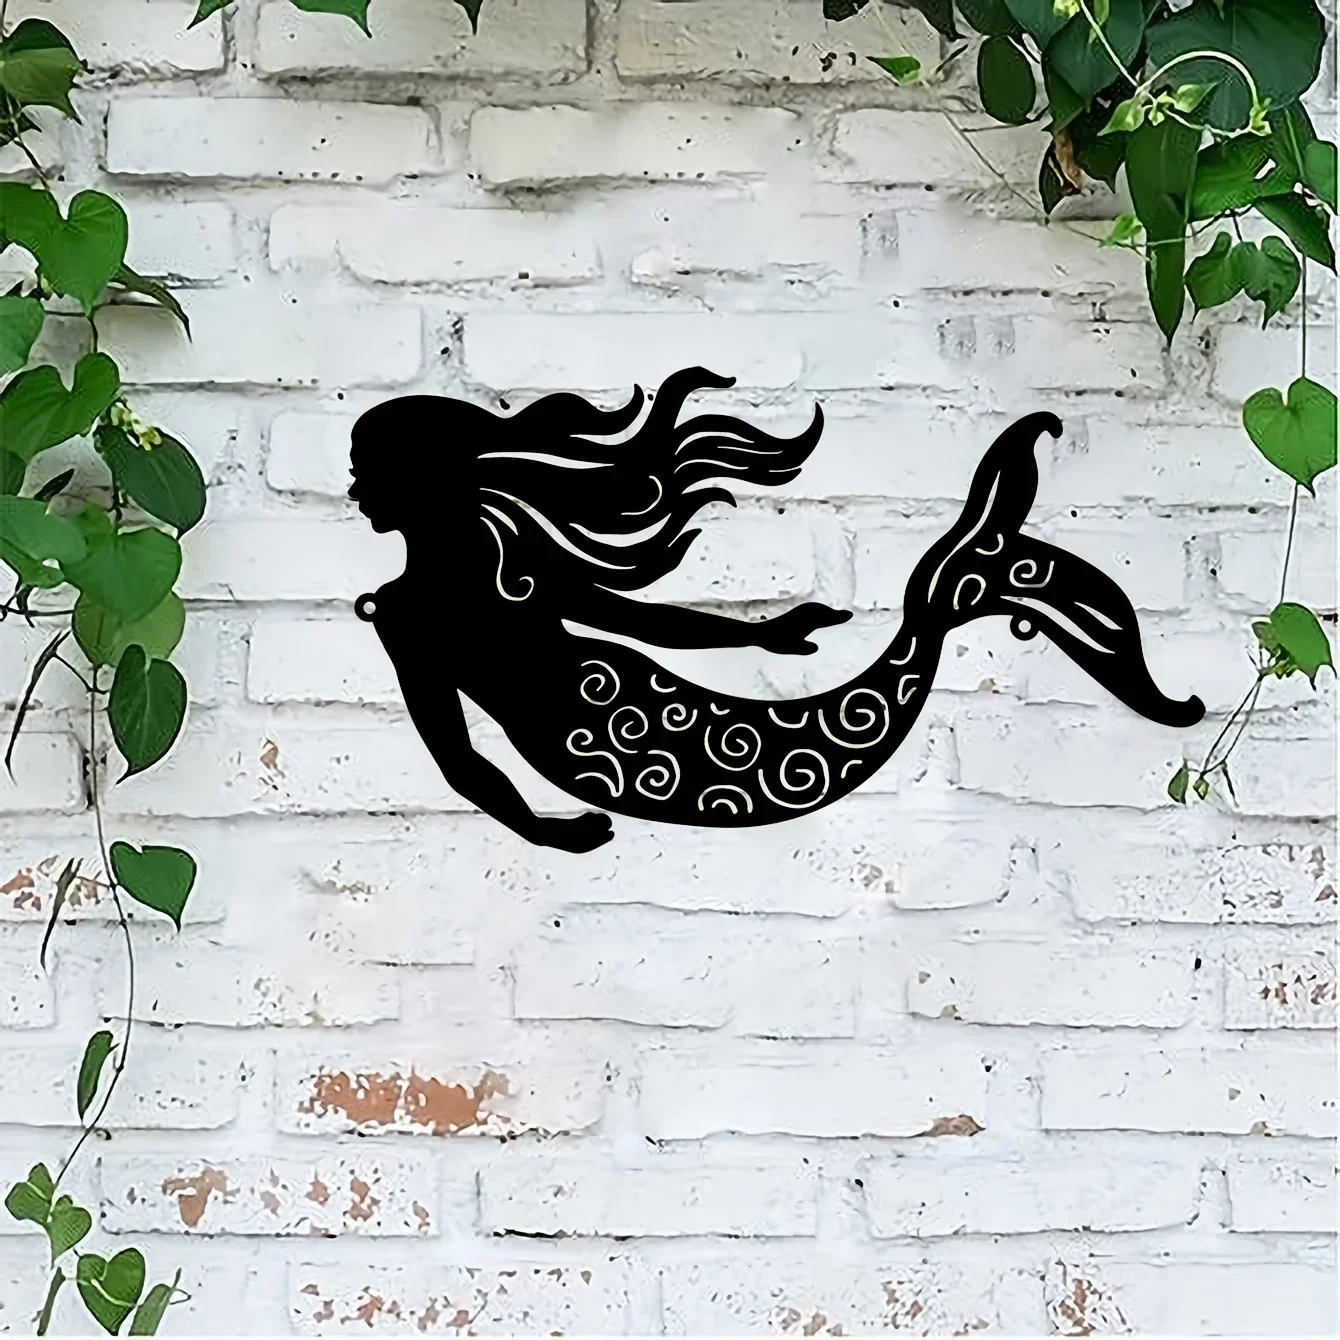 

Rustic Metal Mermaid Wall Art Decoration - Perfect for Patio, and Housewarming Gifts Wall decor metal wall hanging